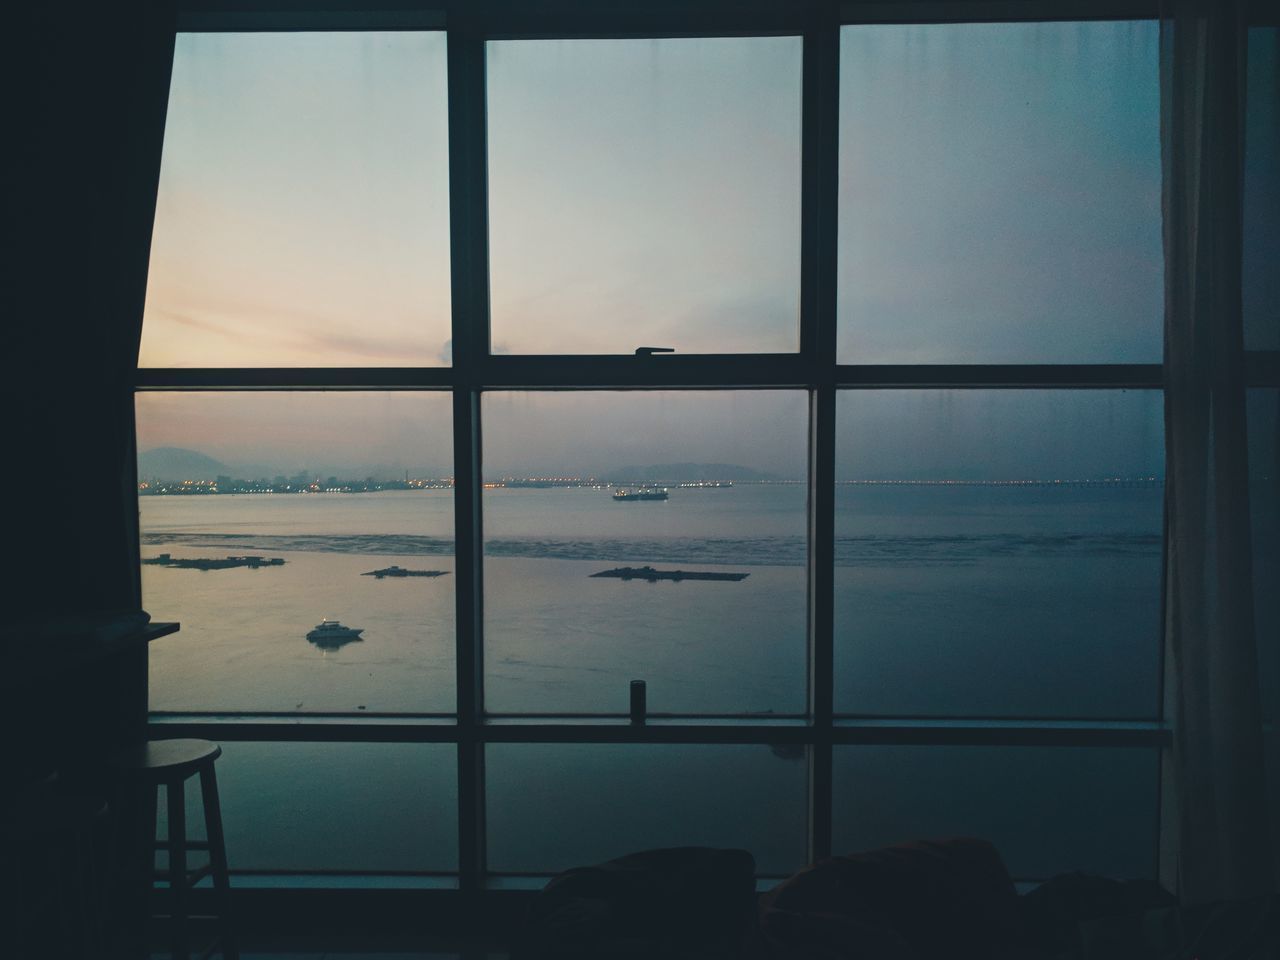 SCENIC VIEW OF SEA AGAINST SKY SEEN THROUGH WINDOW